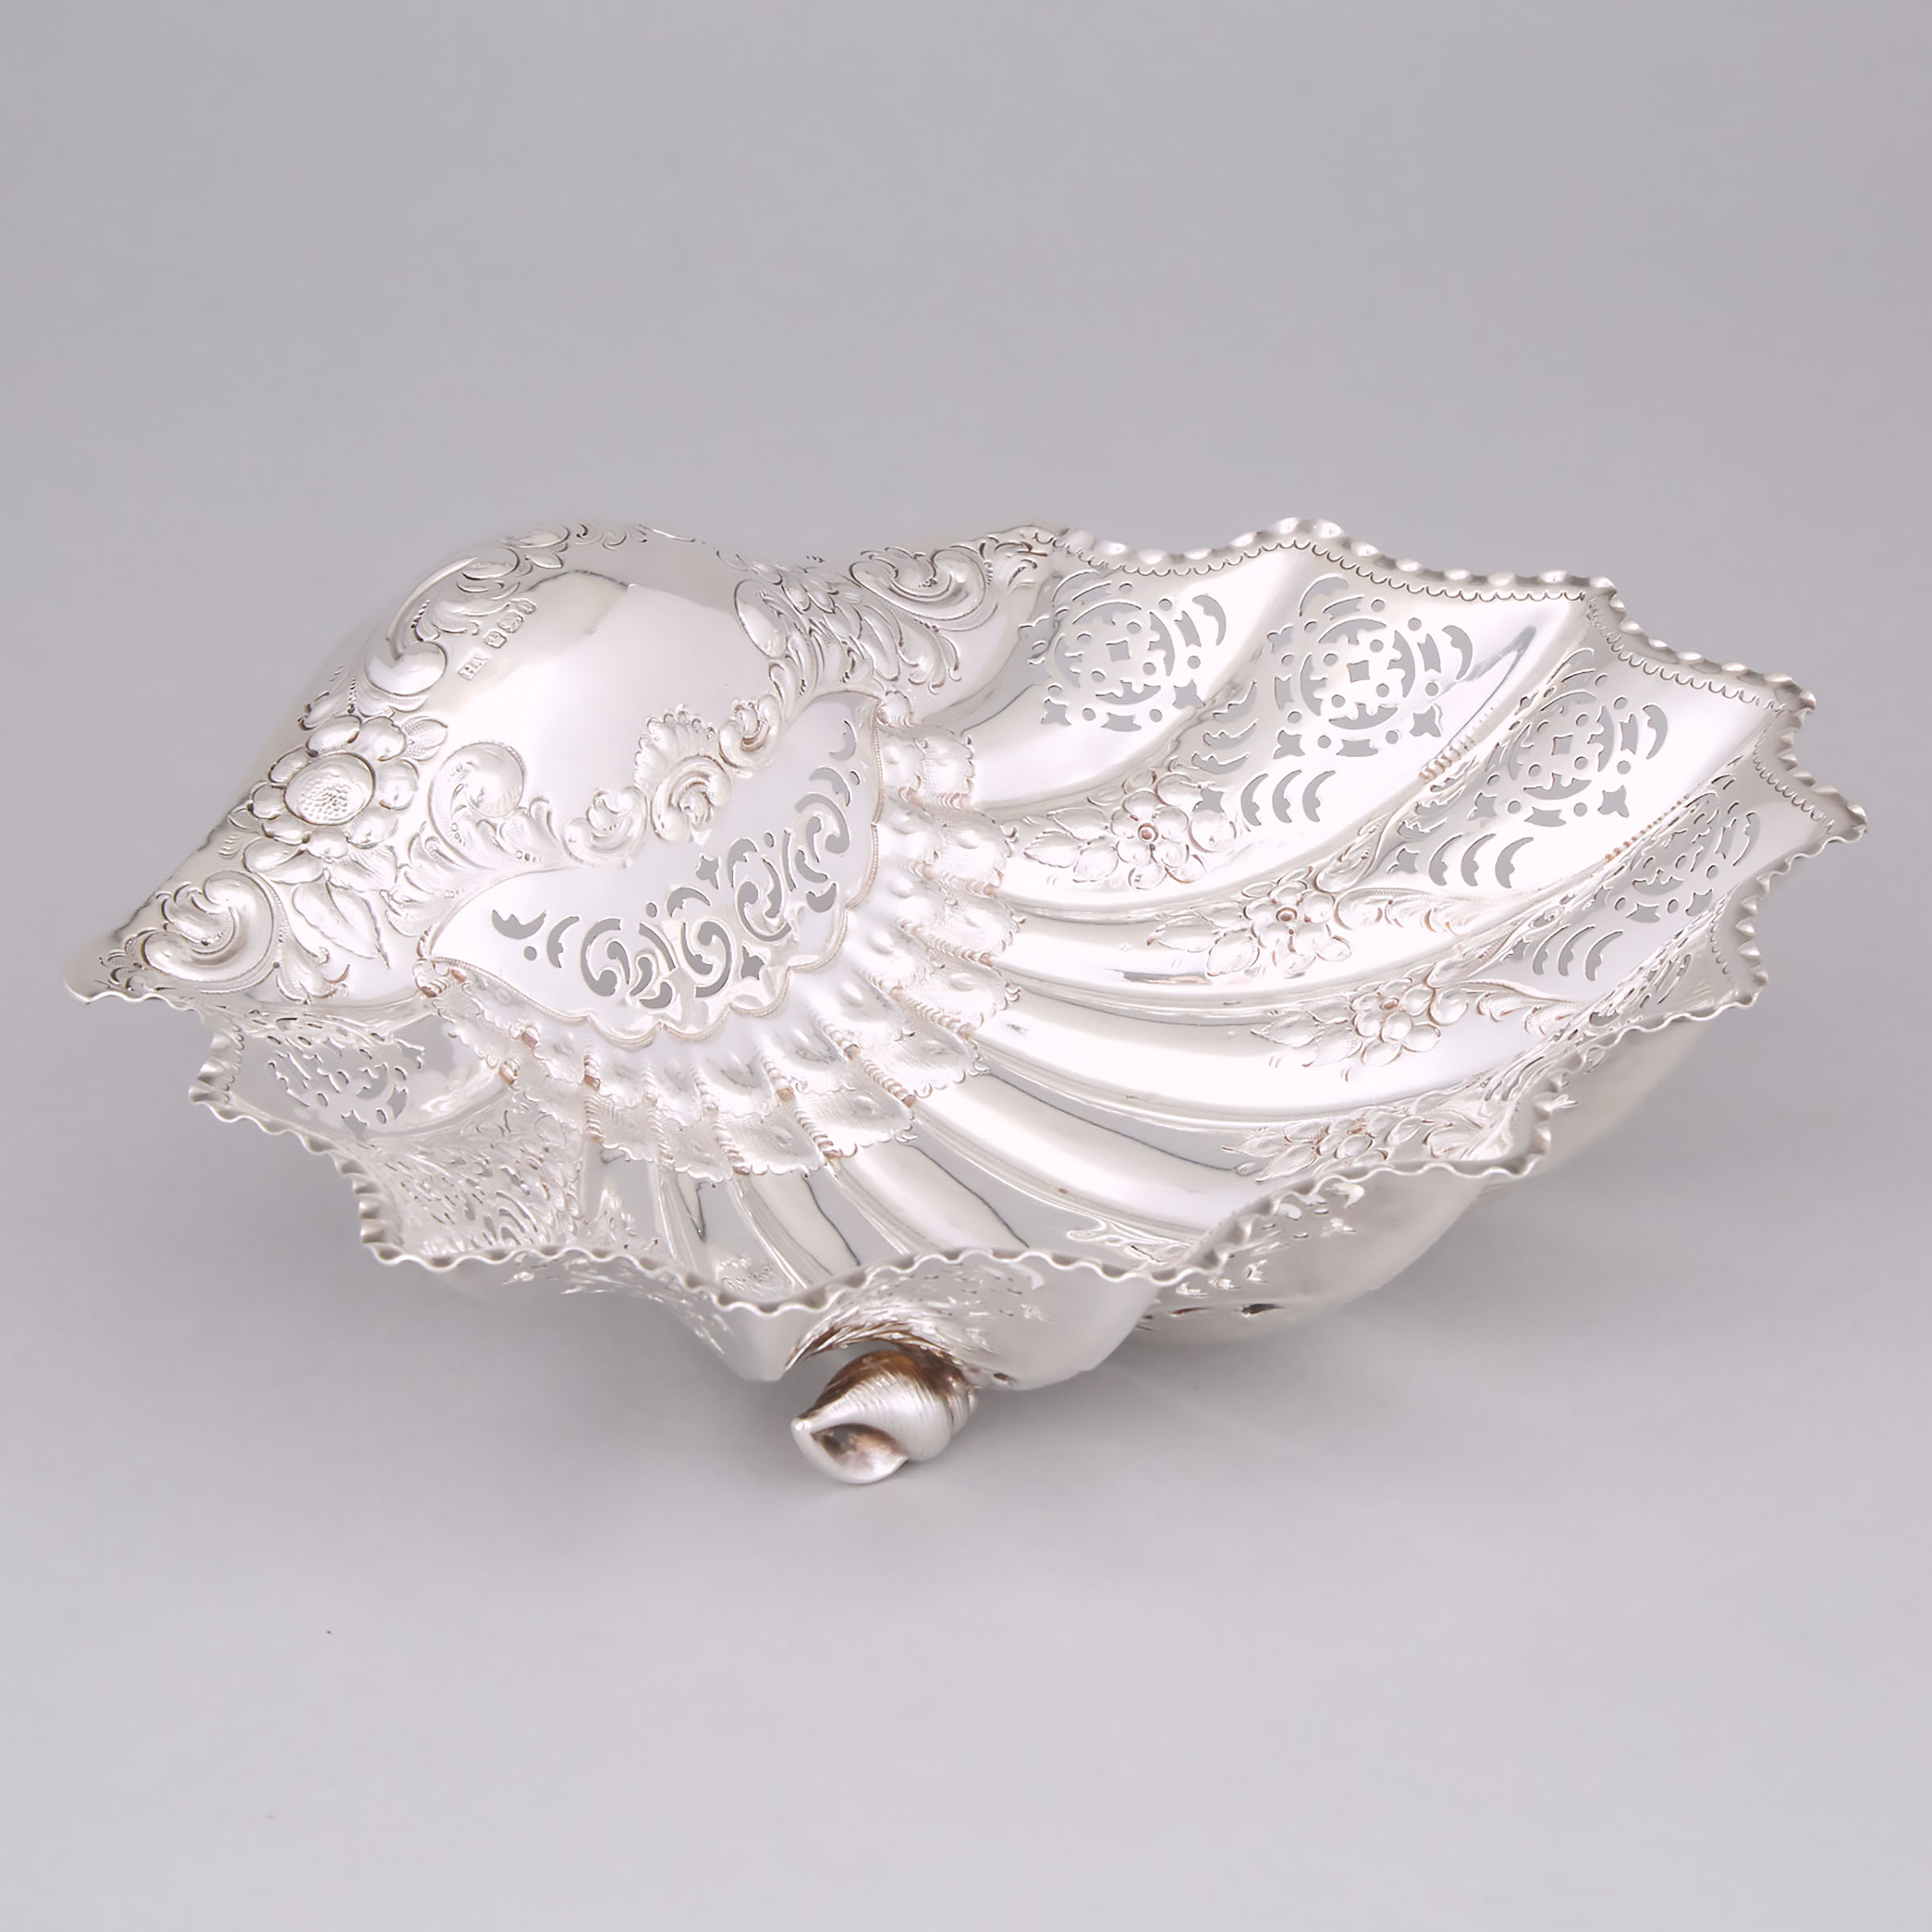 Late Victorian Silver Repoussé and Pierced Shell Dish, Atkin Bros., Sheffield, 1897